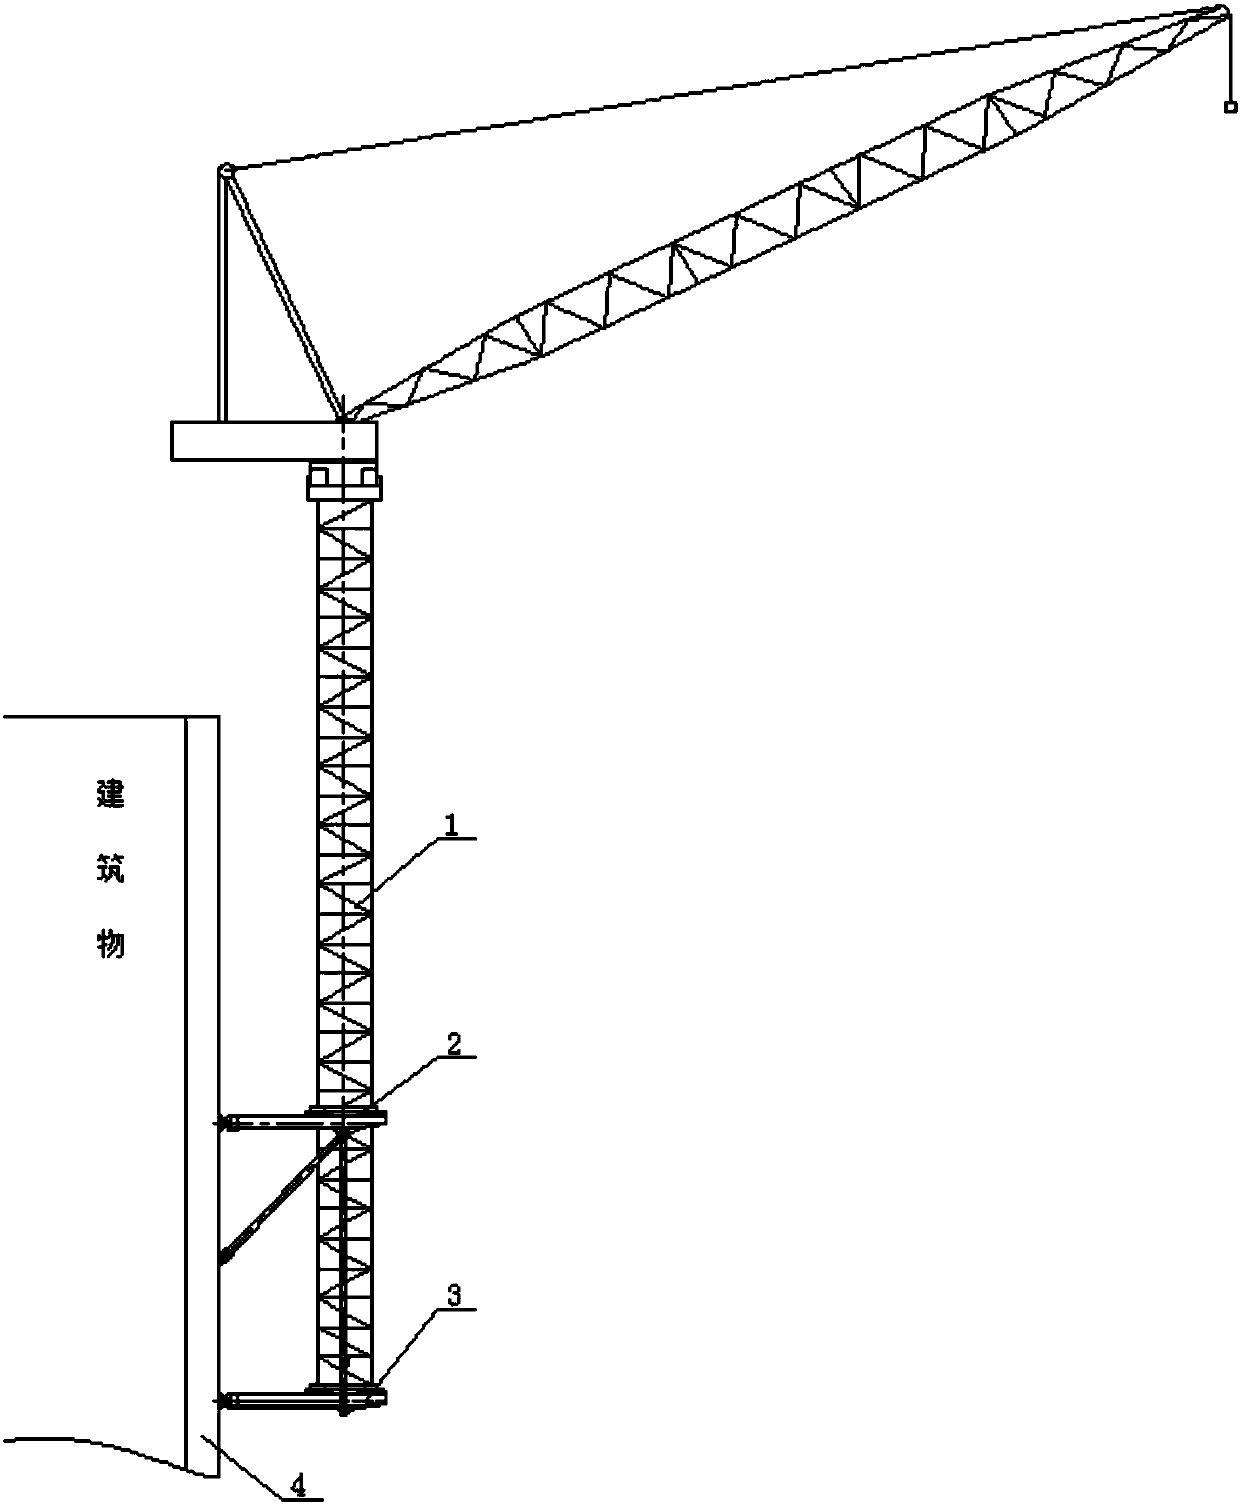 Supporting system of asymmetrical frame tandem externally suspended climbing tower crane